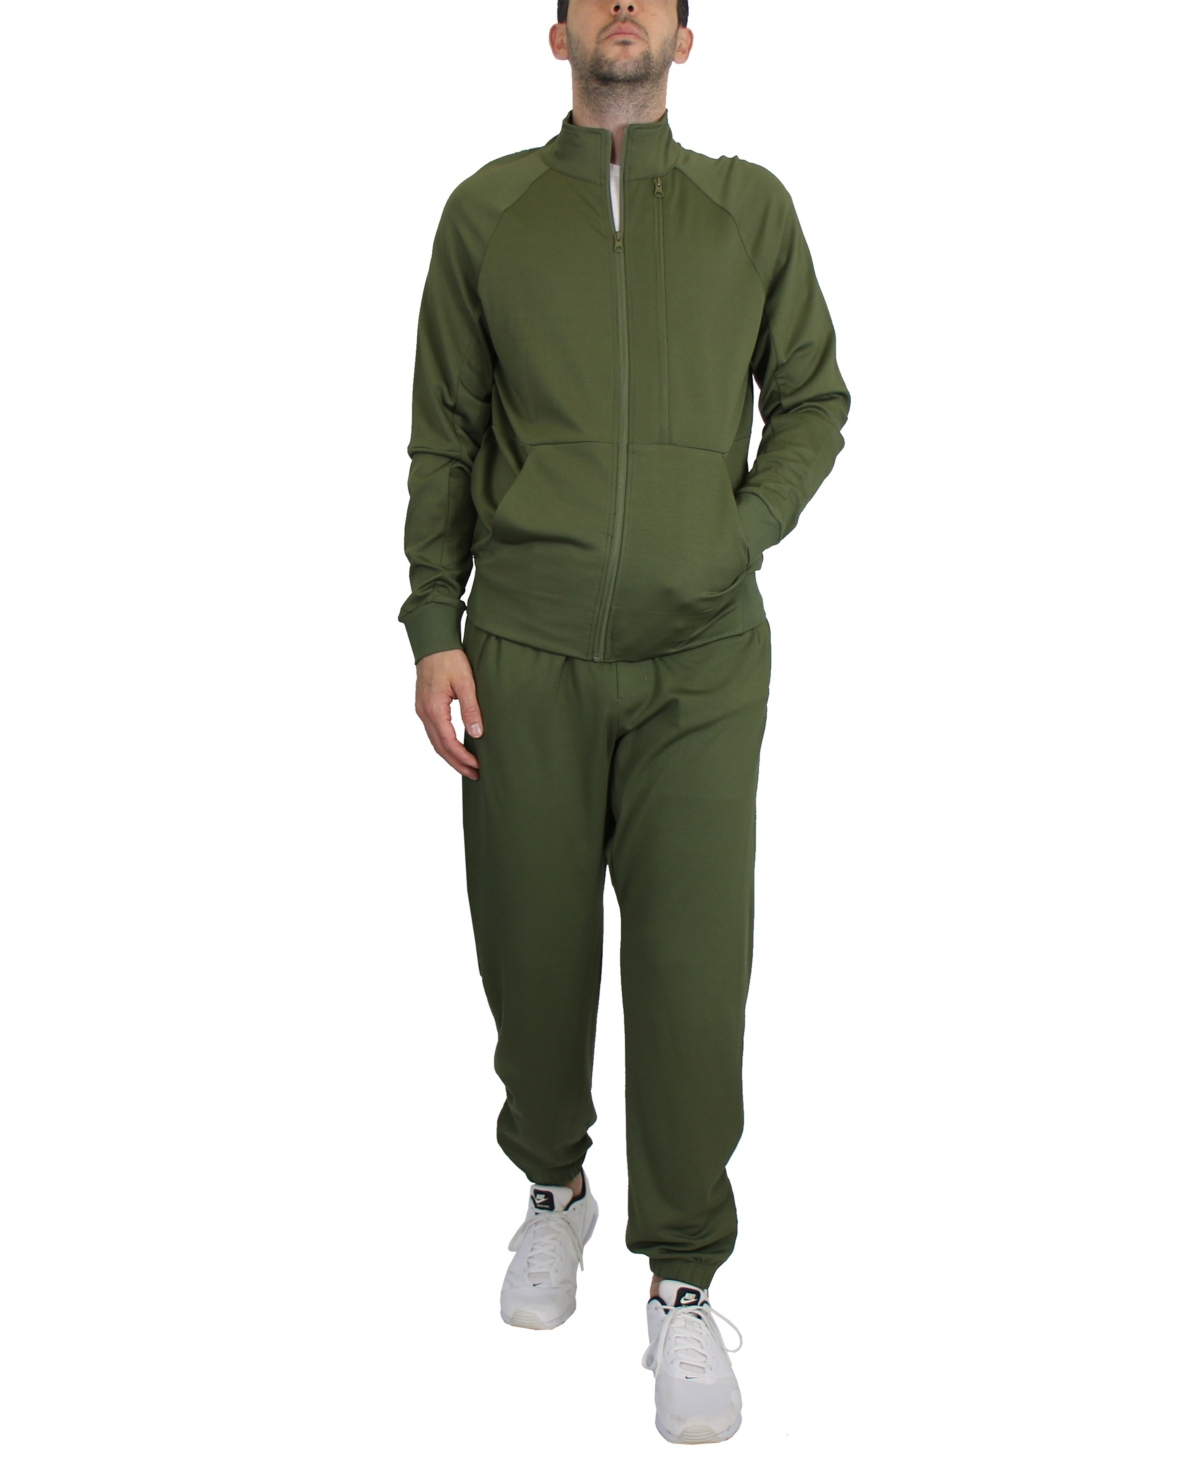 Men's Moisture Wicking Performance Active Track Jacket and Joggers, 2-Piece Set - Olive